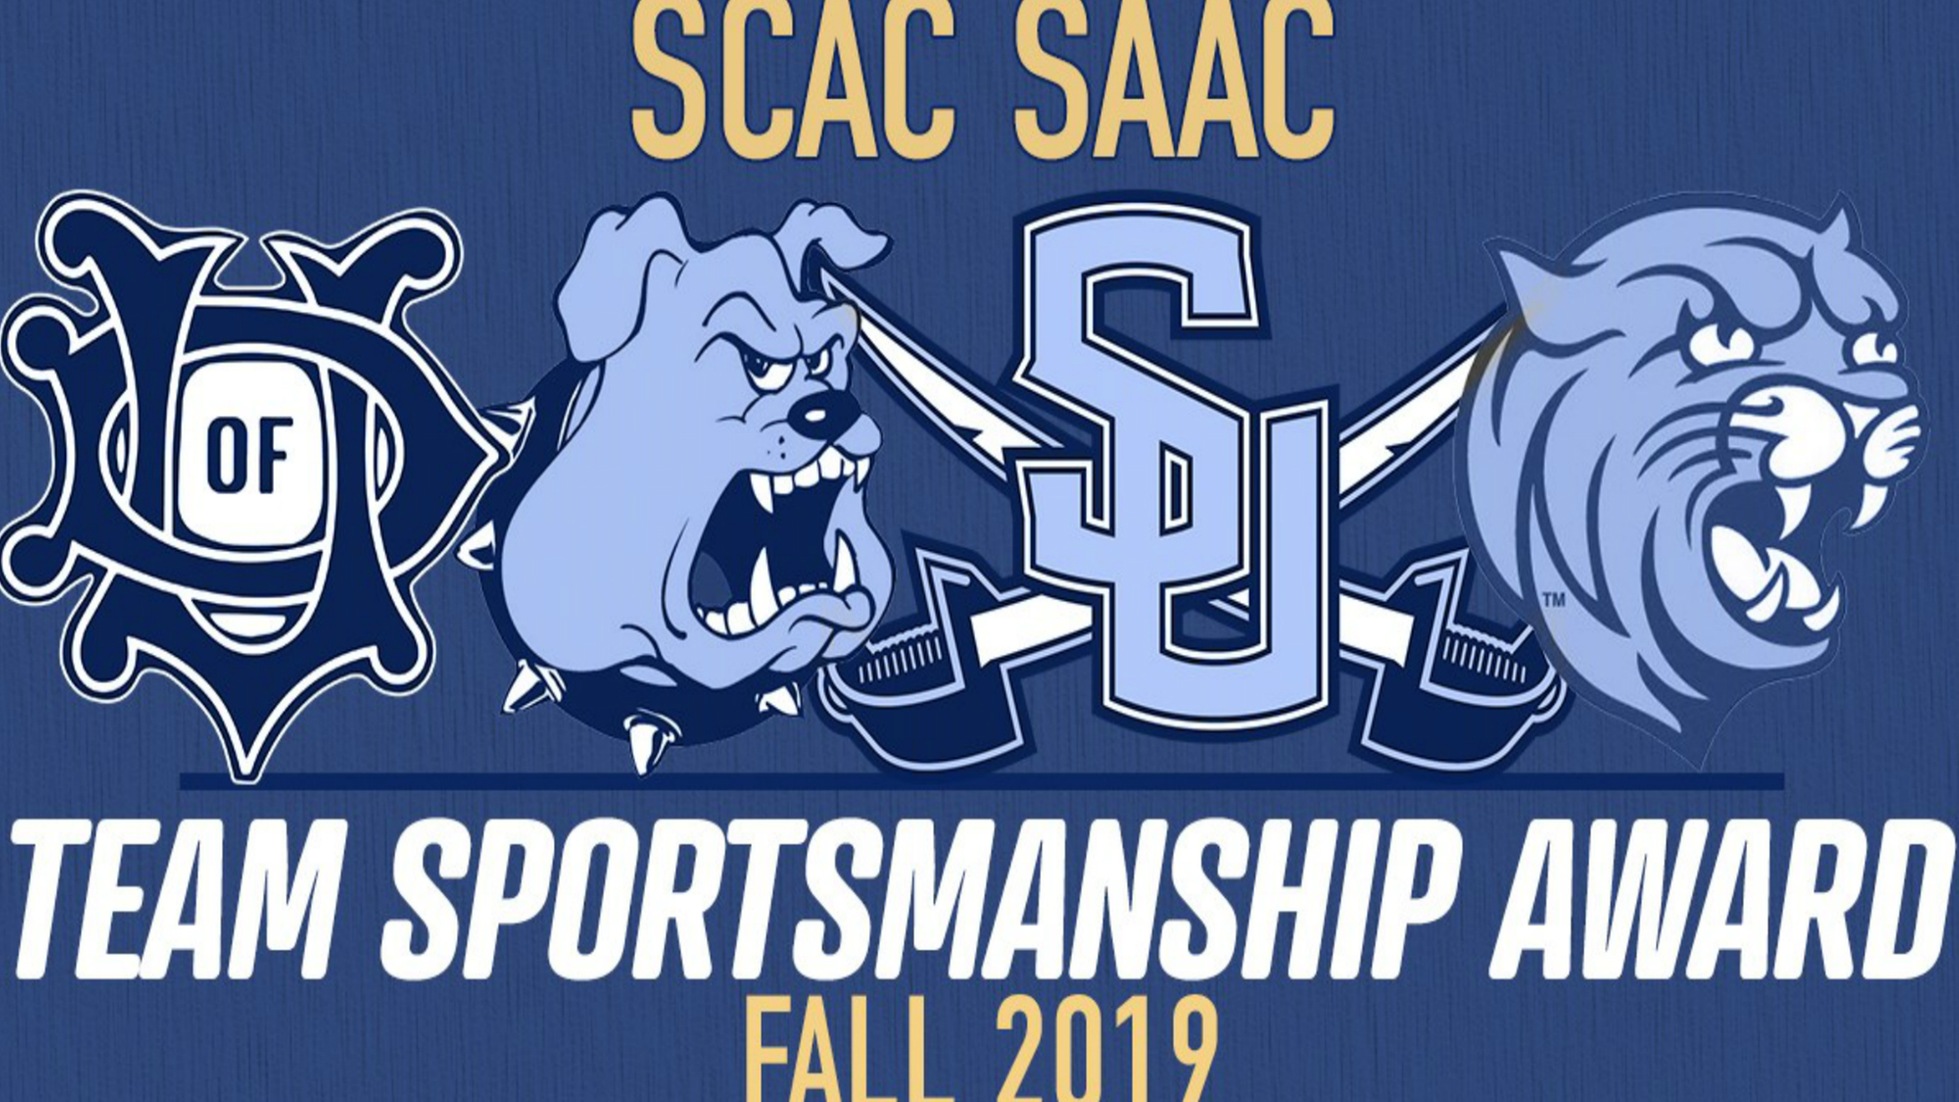 UD Cross Country Earns SCAC Team Sportsmanship Award